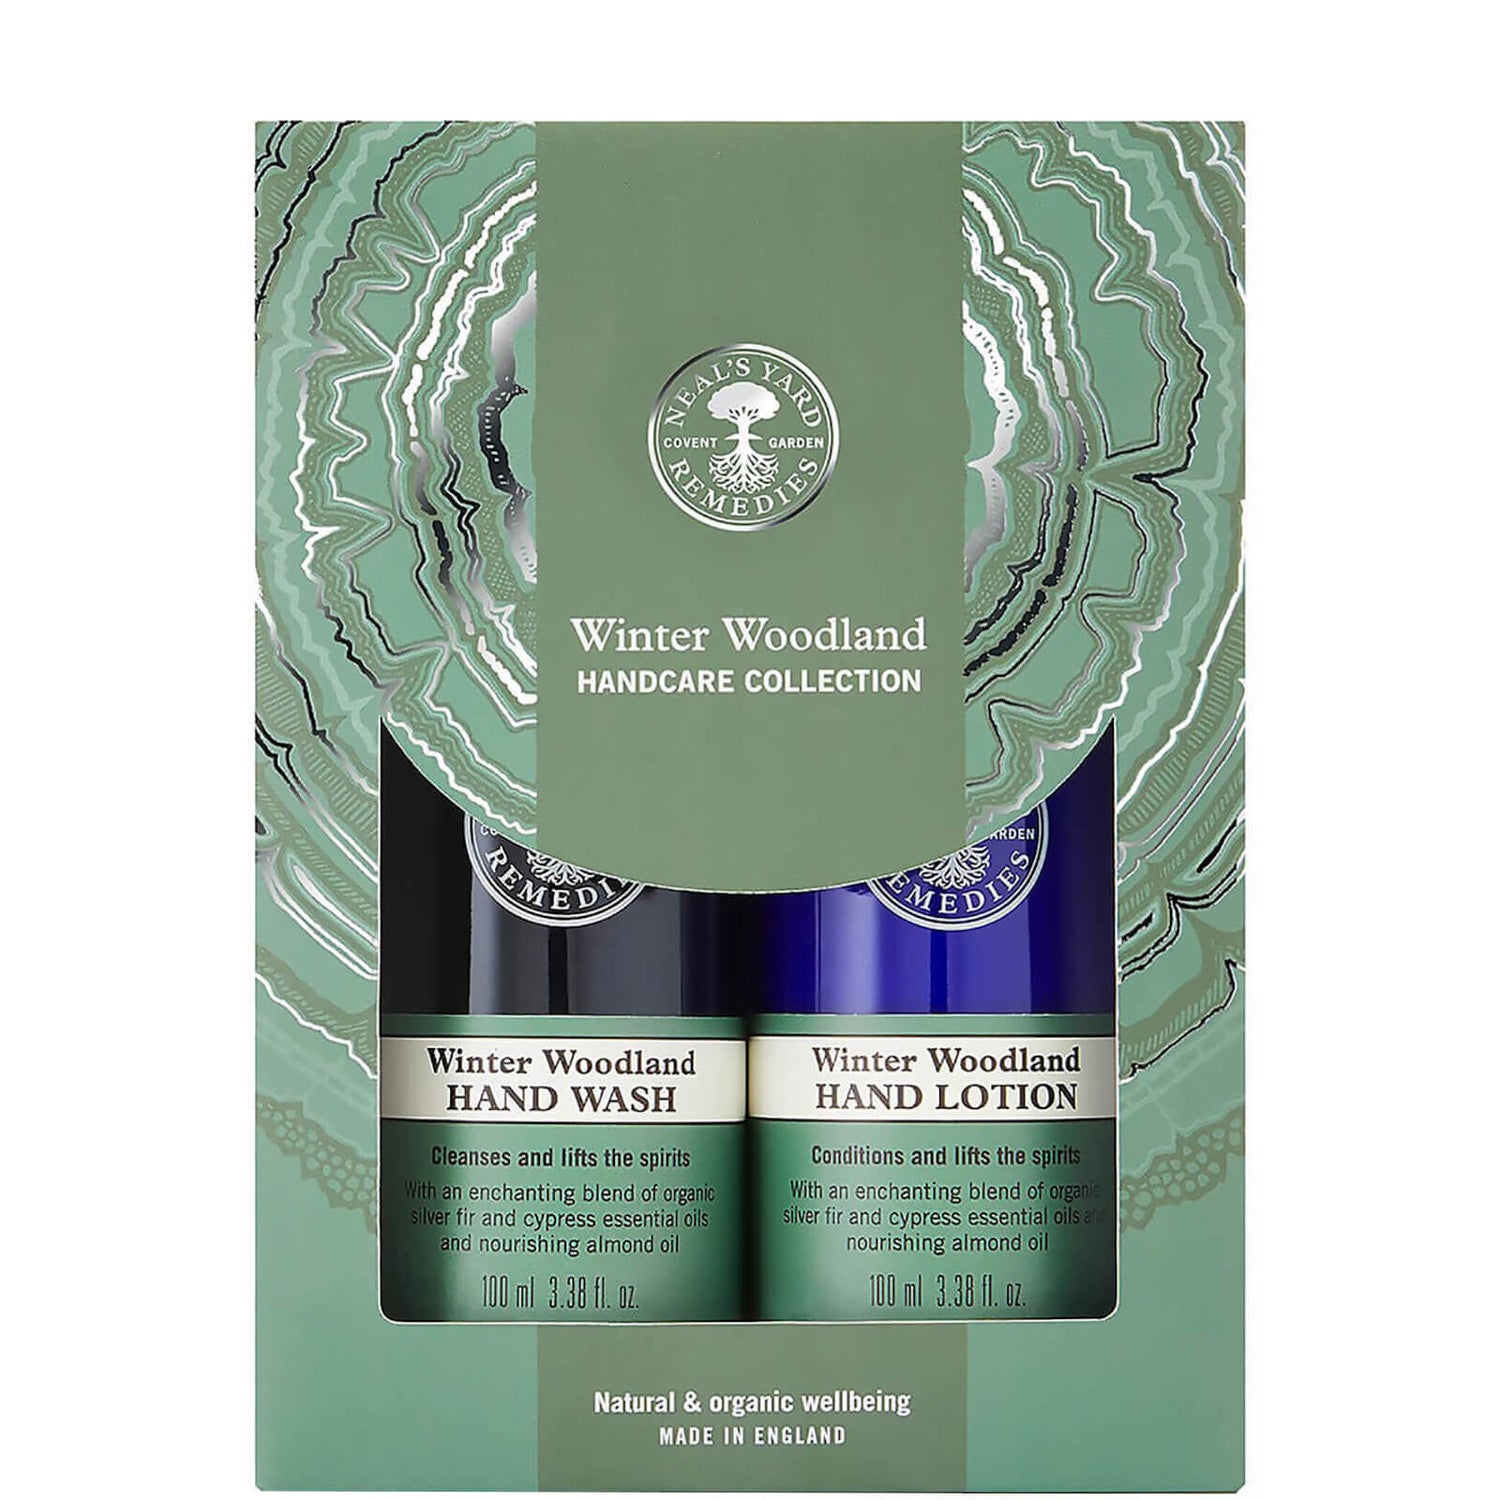 Neal's Yard Remedies Winter Woodland Handcare Collection